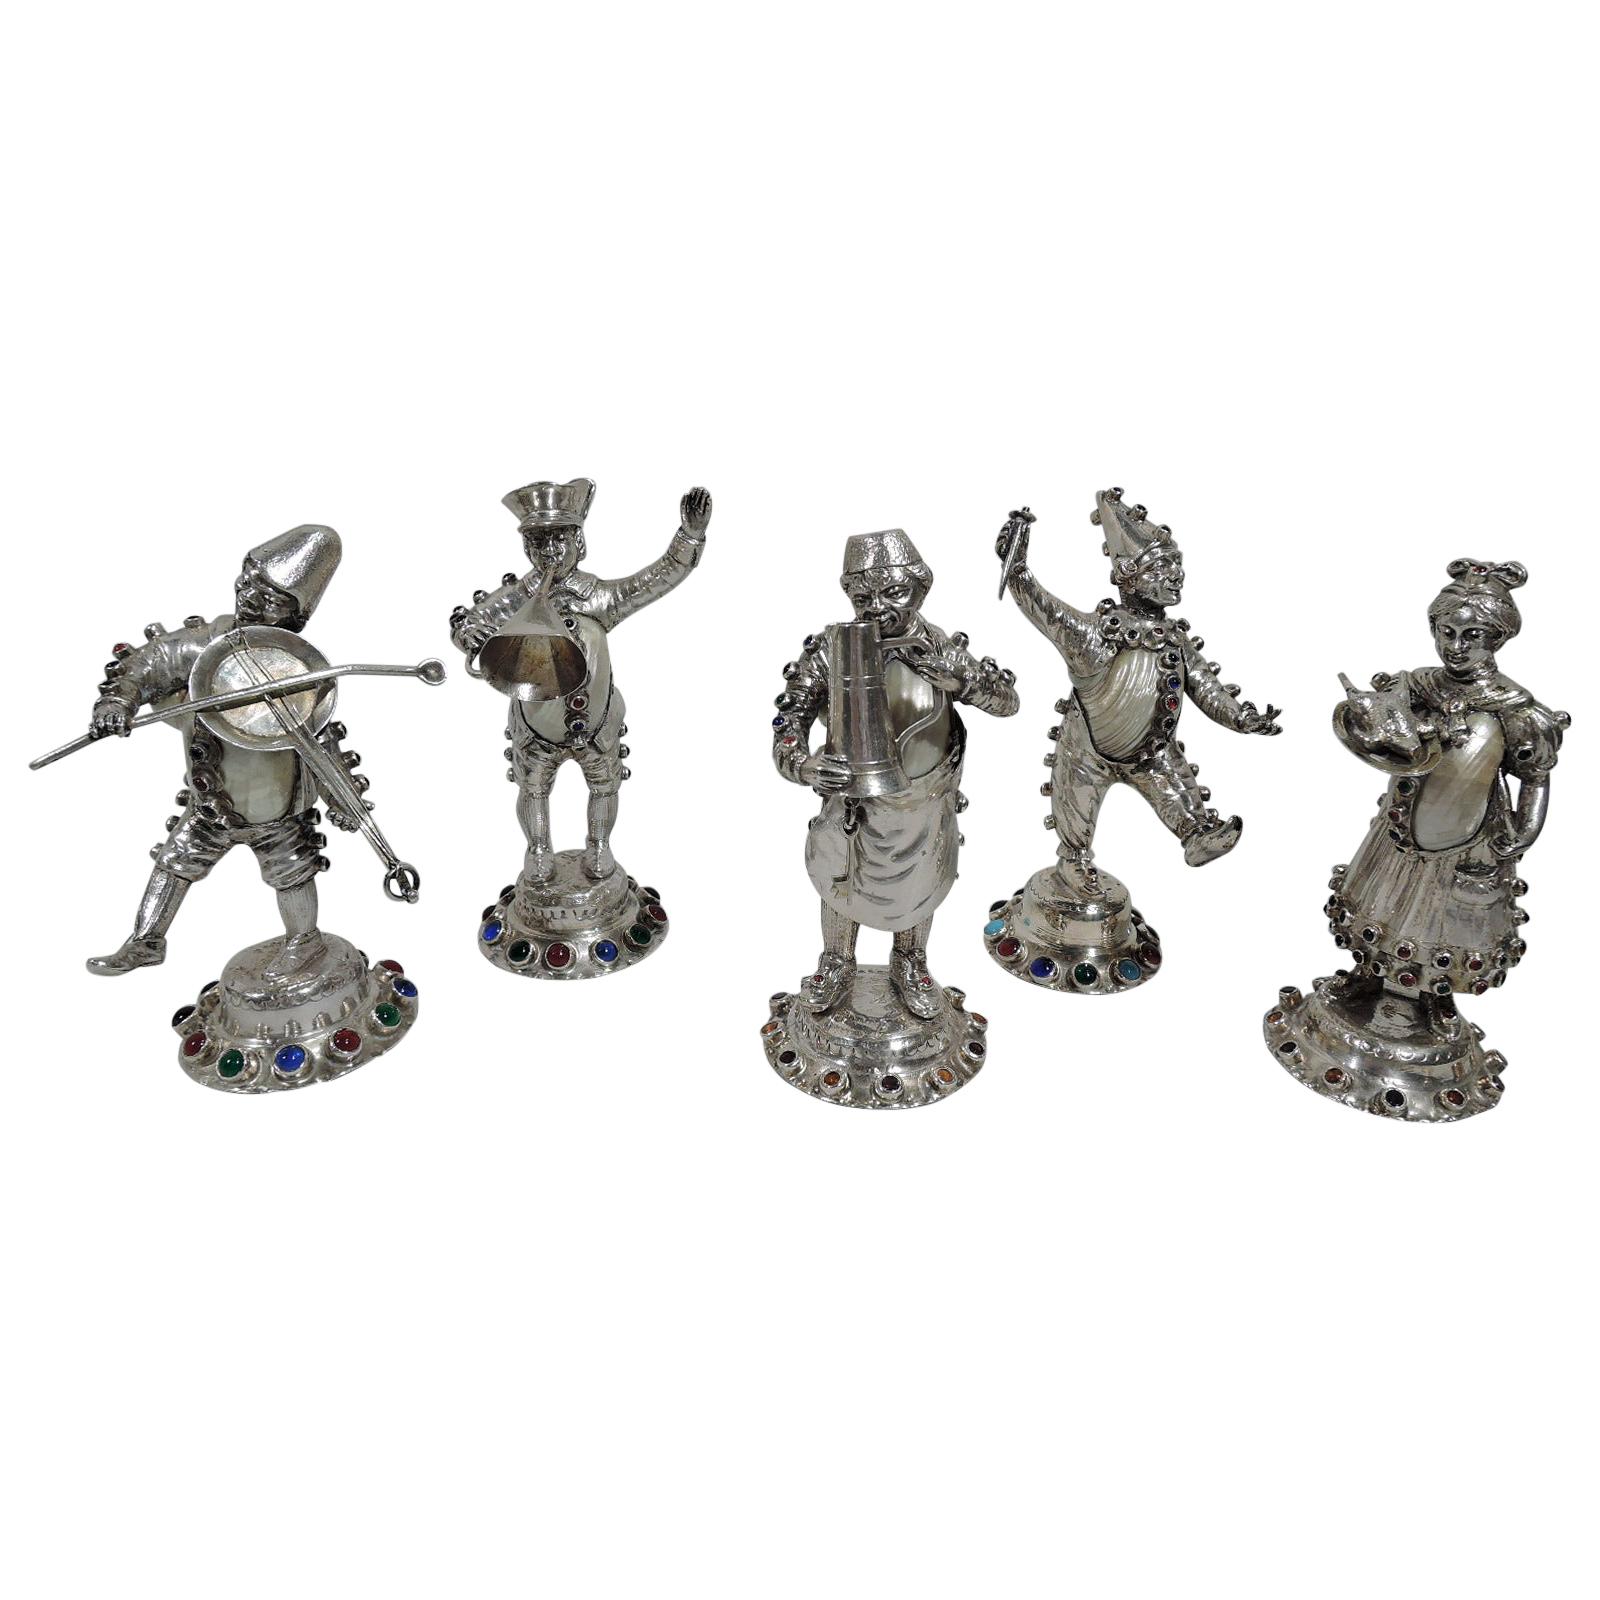 Set of 5 Antique German Jeweled Silver and Shell Country Folk Figures